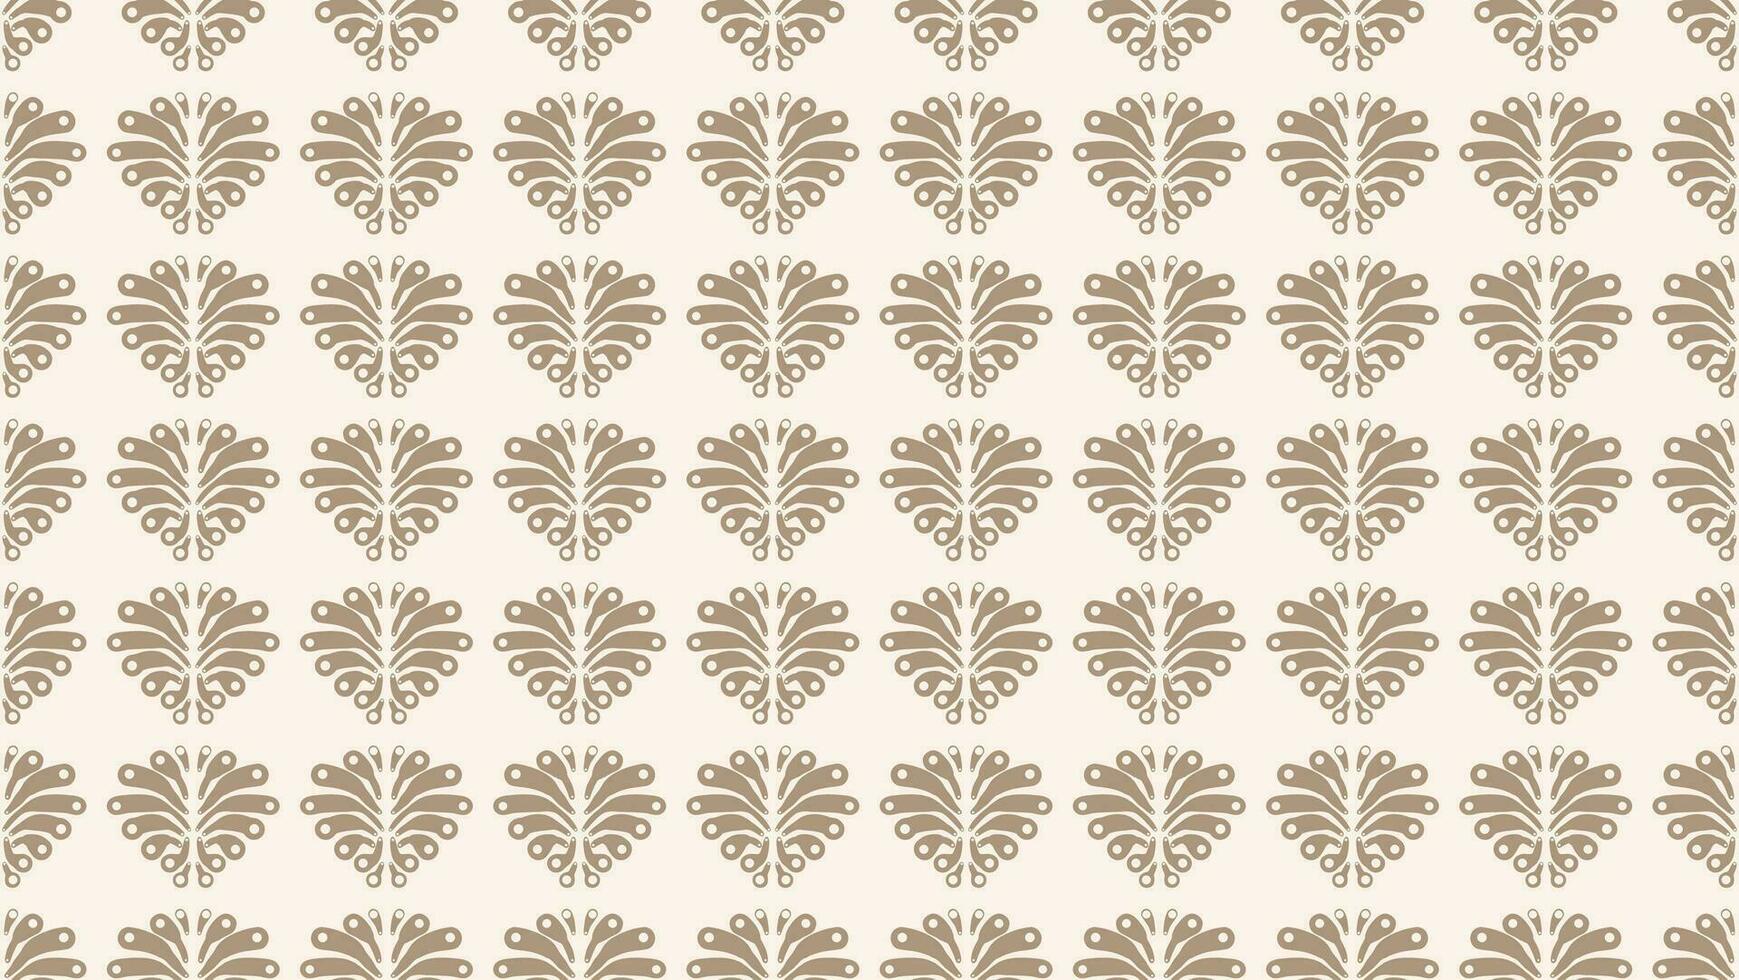 Minimalist boho seamless pattern with leaves. For backgrounds, wallpapers, textiles, and fashion. vector